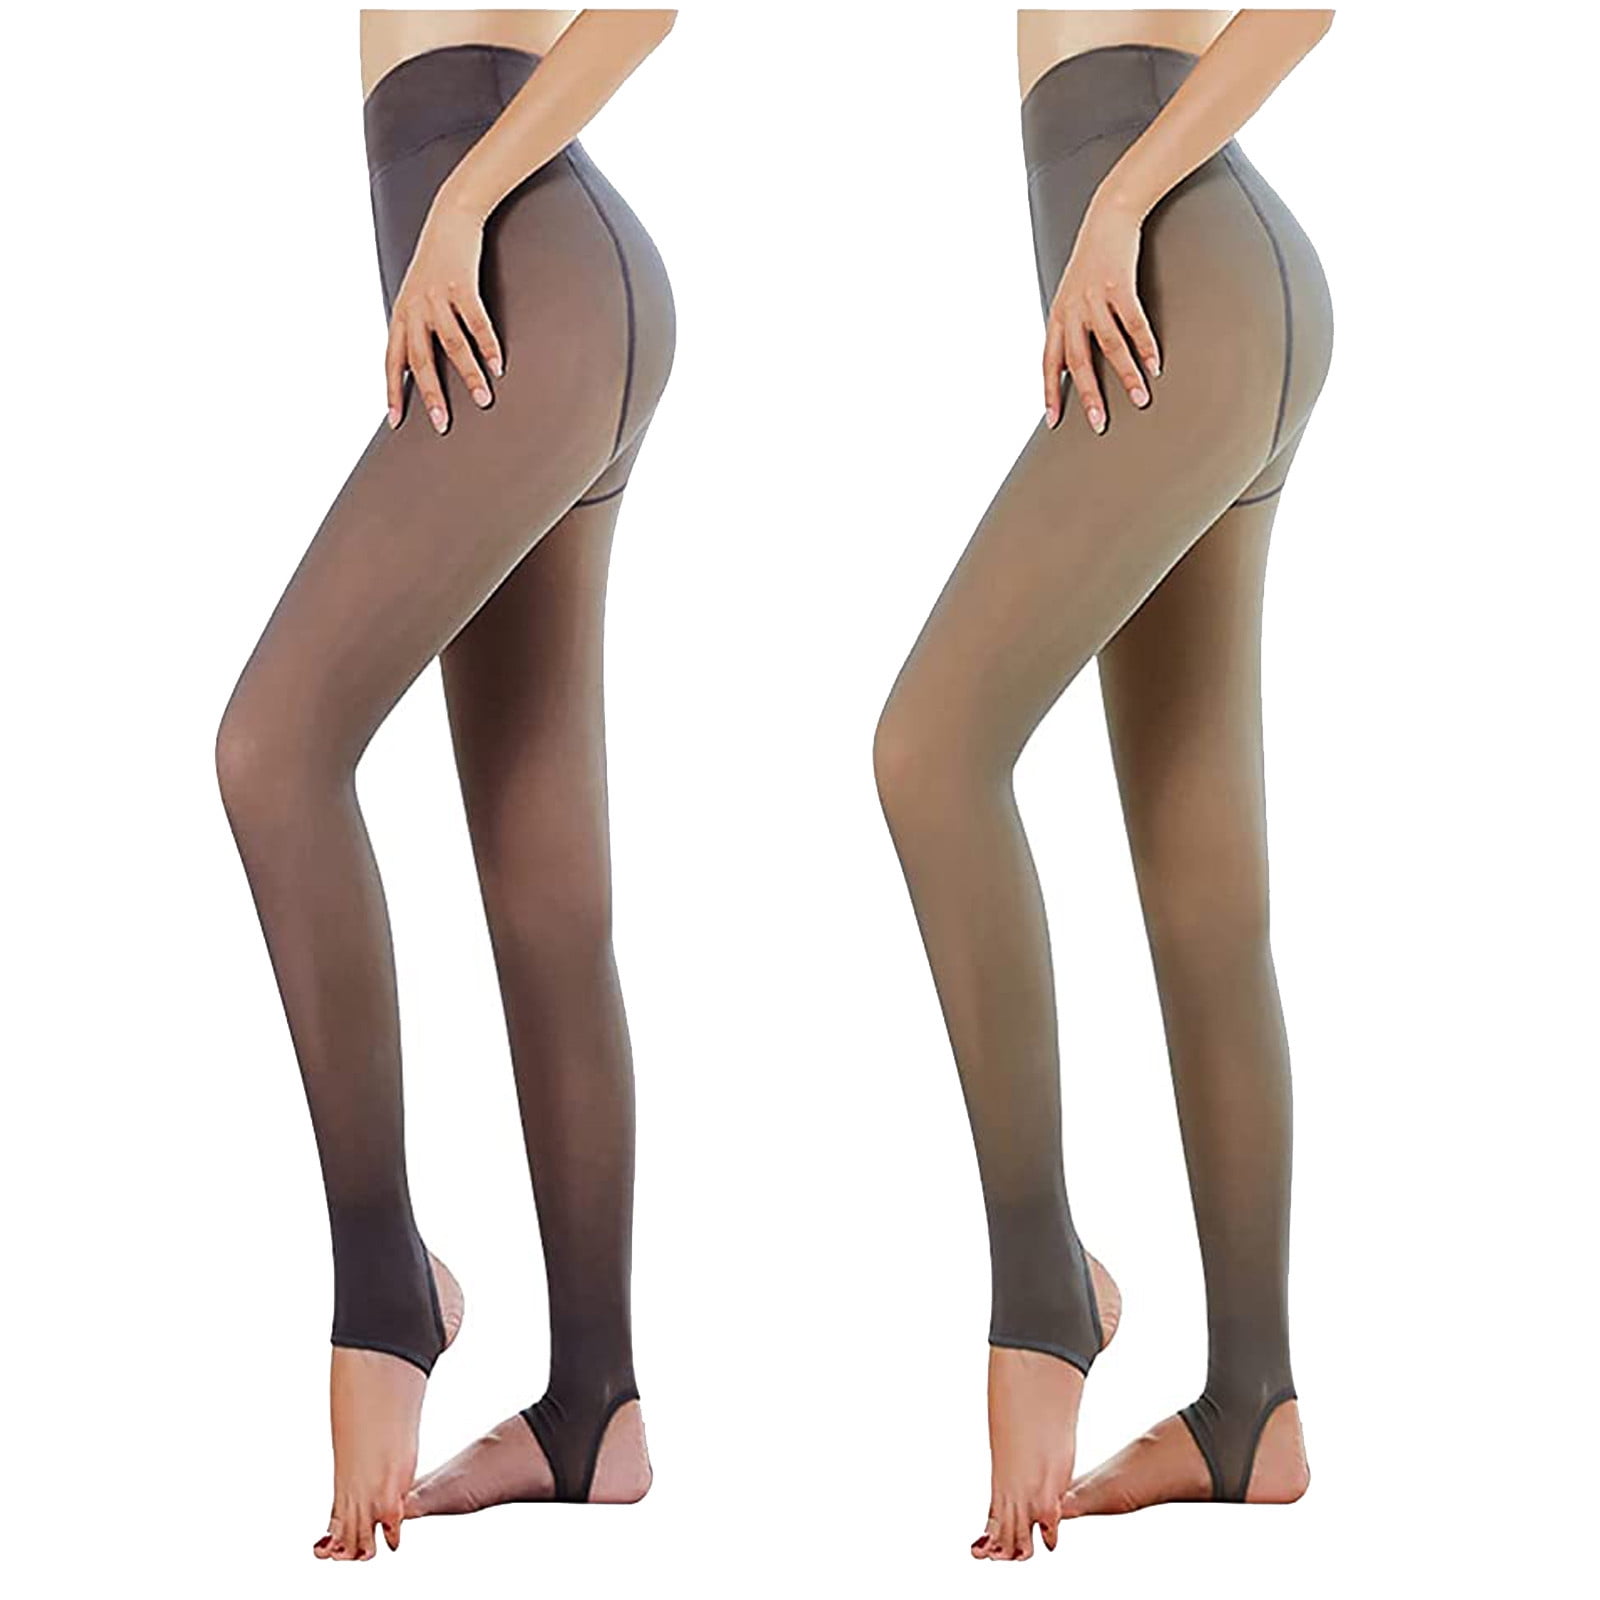 Lolmot 2PCS Fleece Lined Tights Women Fake Translucent Warm Pantyhose  Leggings Sheer Nude Tights Winter High Waisted Thermal Sheer Slim Stretchy